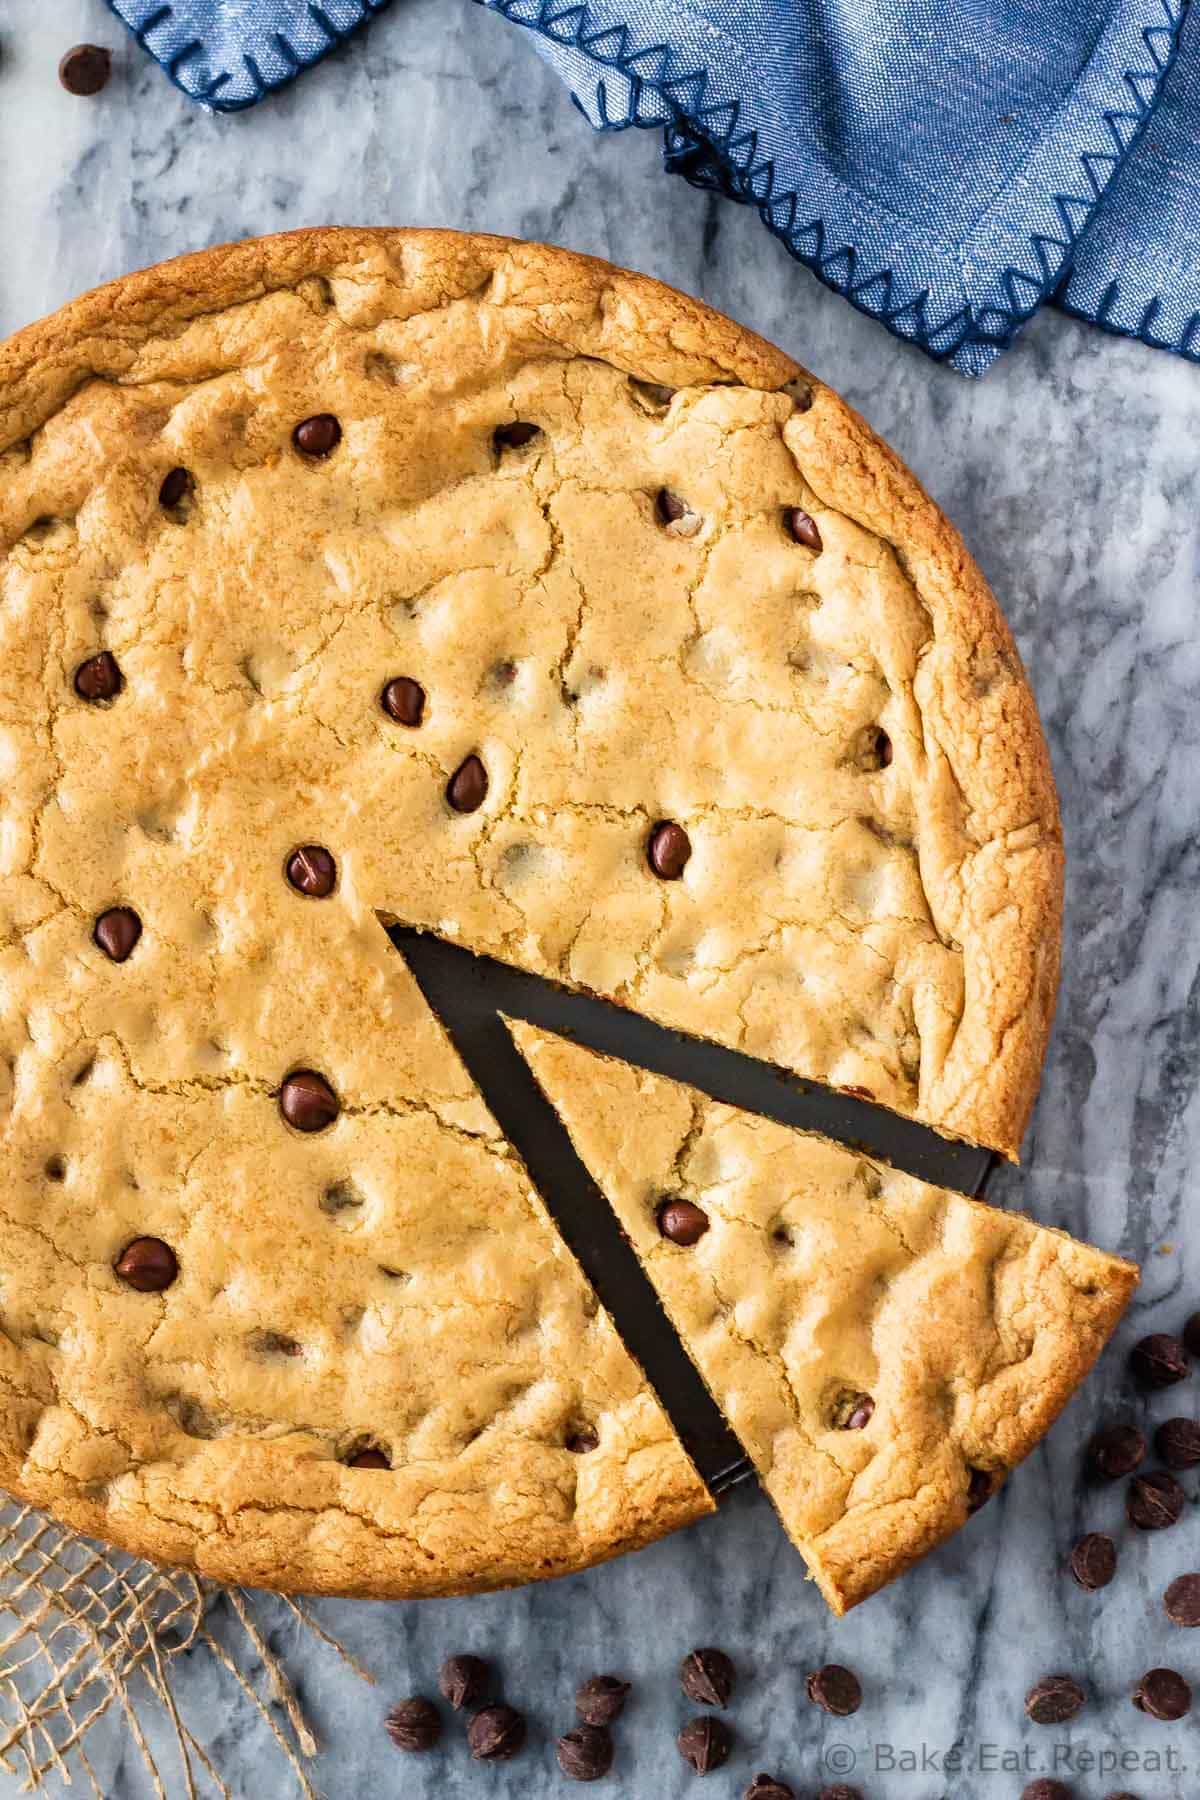 How to Make a Giant Chocolate Chip Pan Cookie